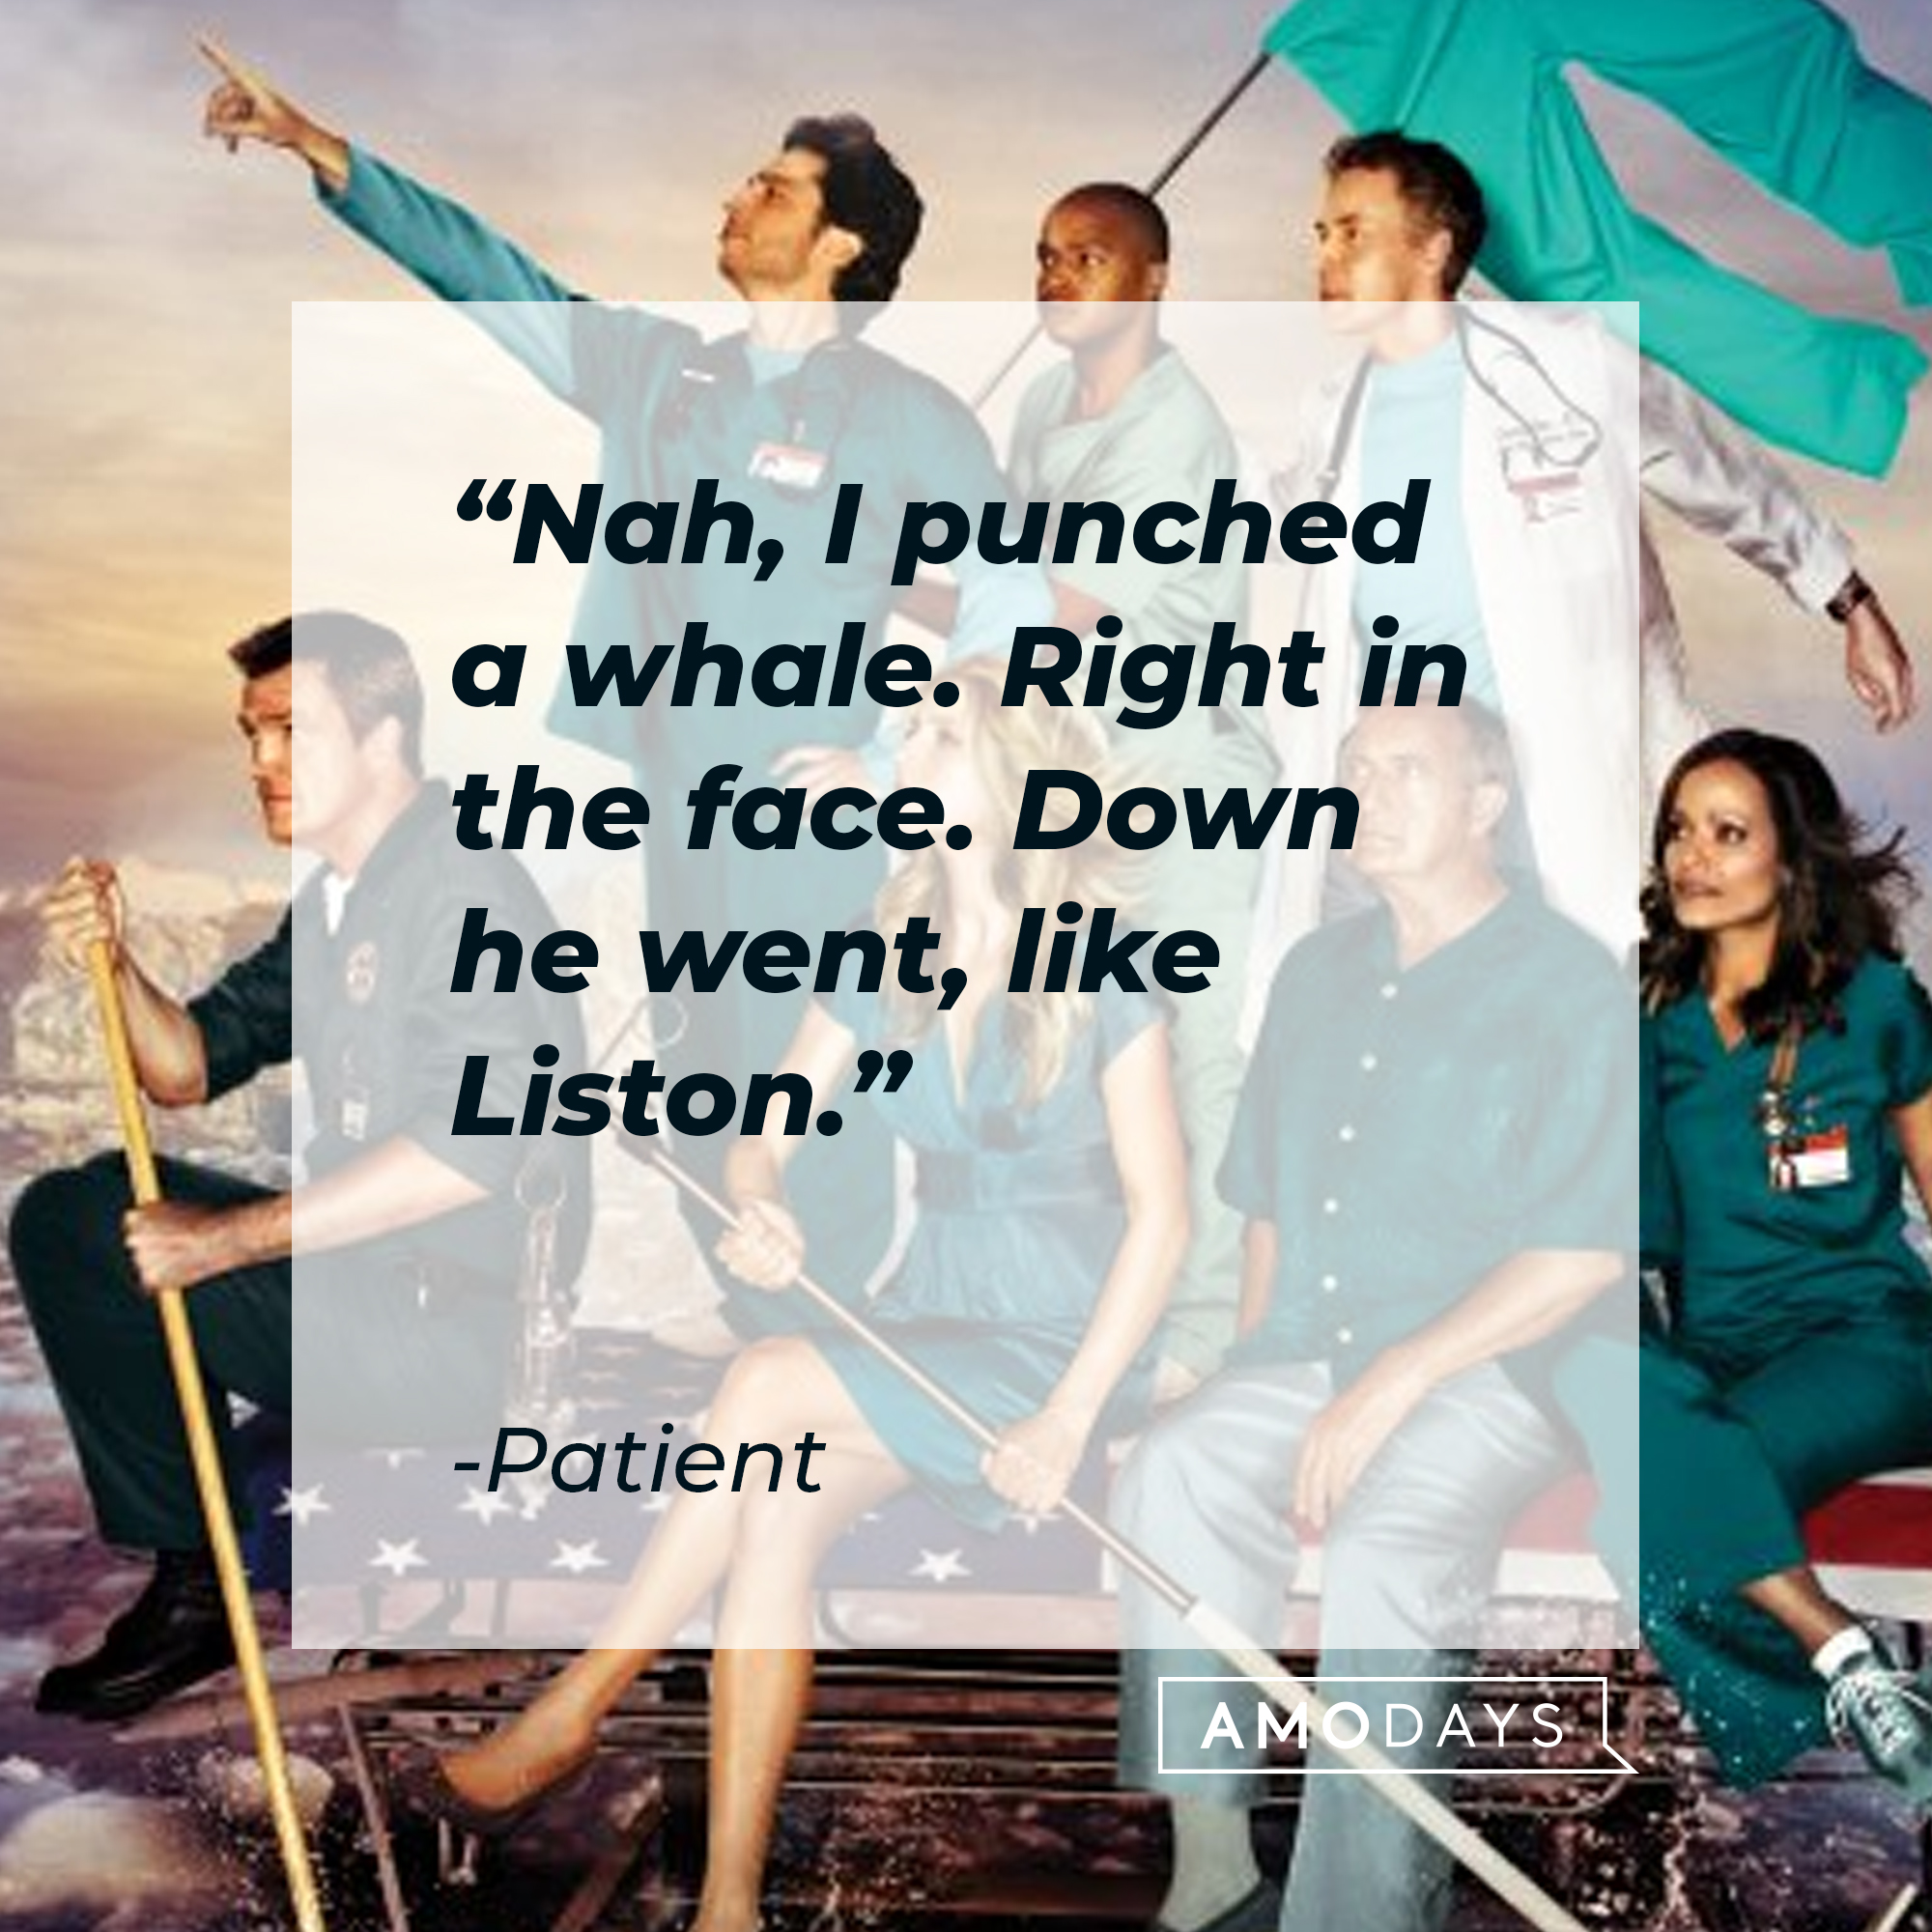 Multiple characters from ”Scrubs” with a patient’s quote: “Nah, I punched a whale. Right in the face. Down he went, like Liston.” | Source: Facebook.com/scrubs